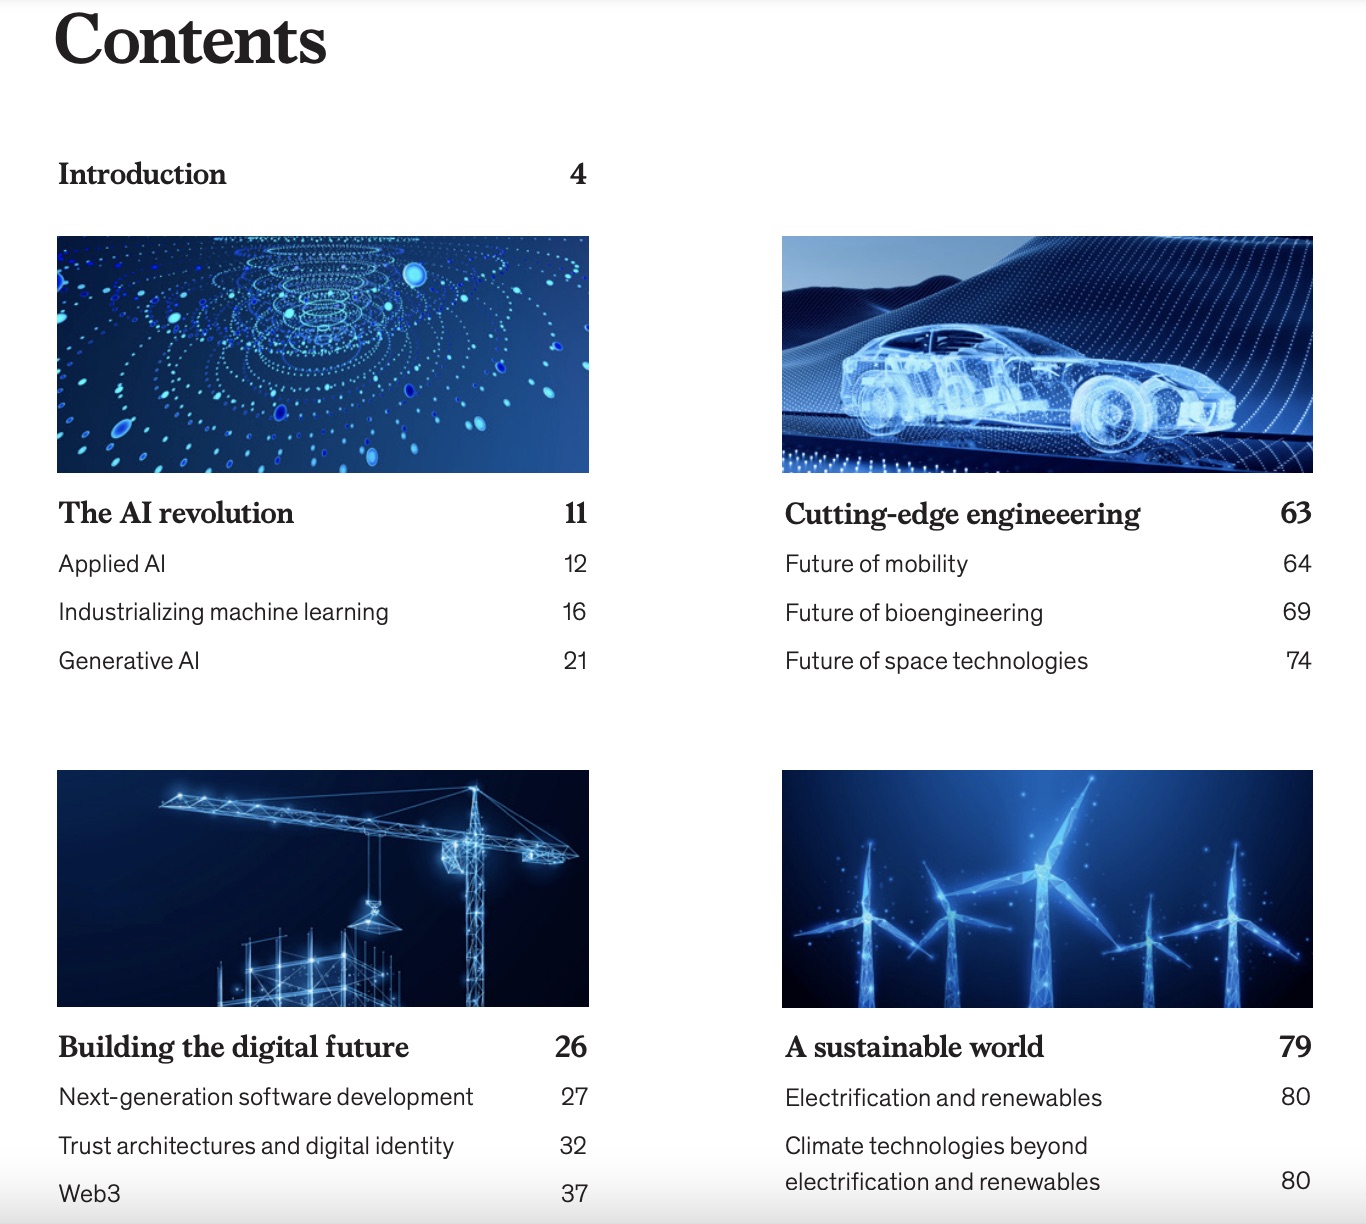 McKinsey & Company's ebook contents section